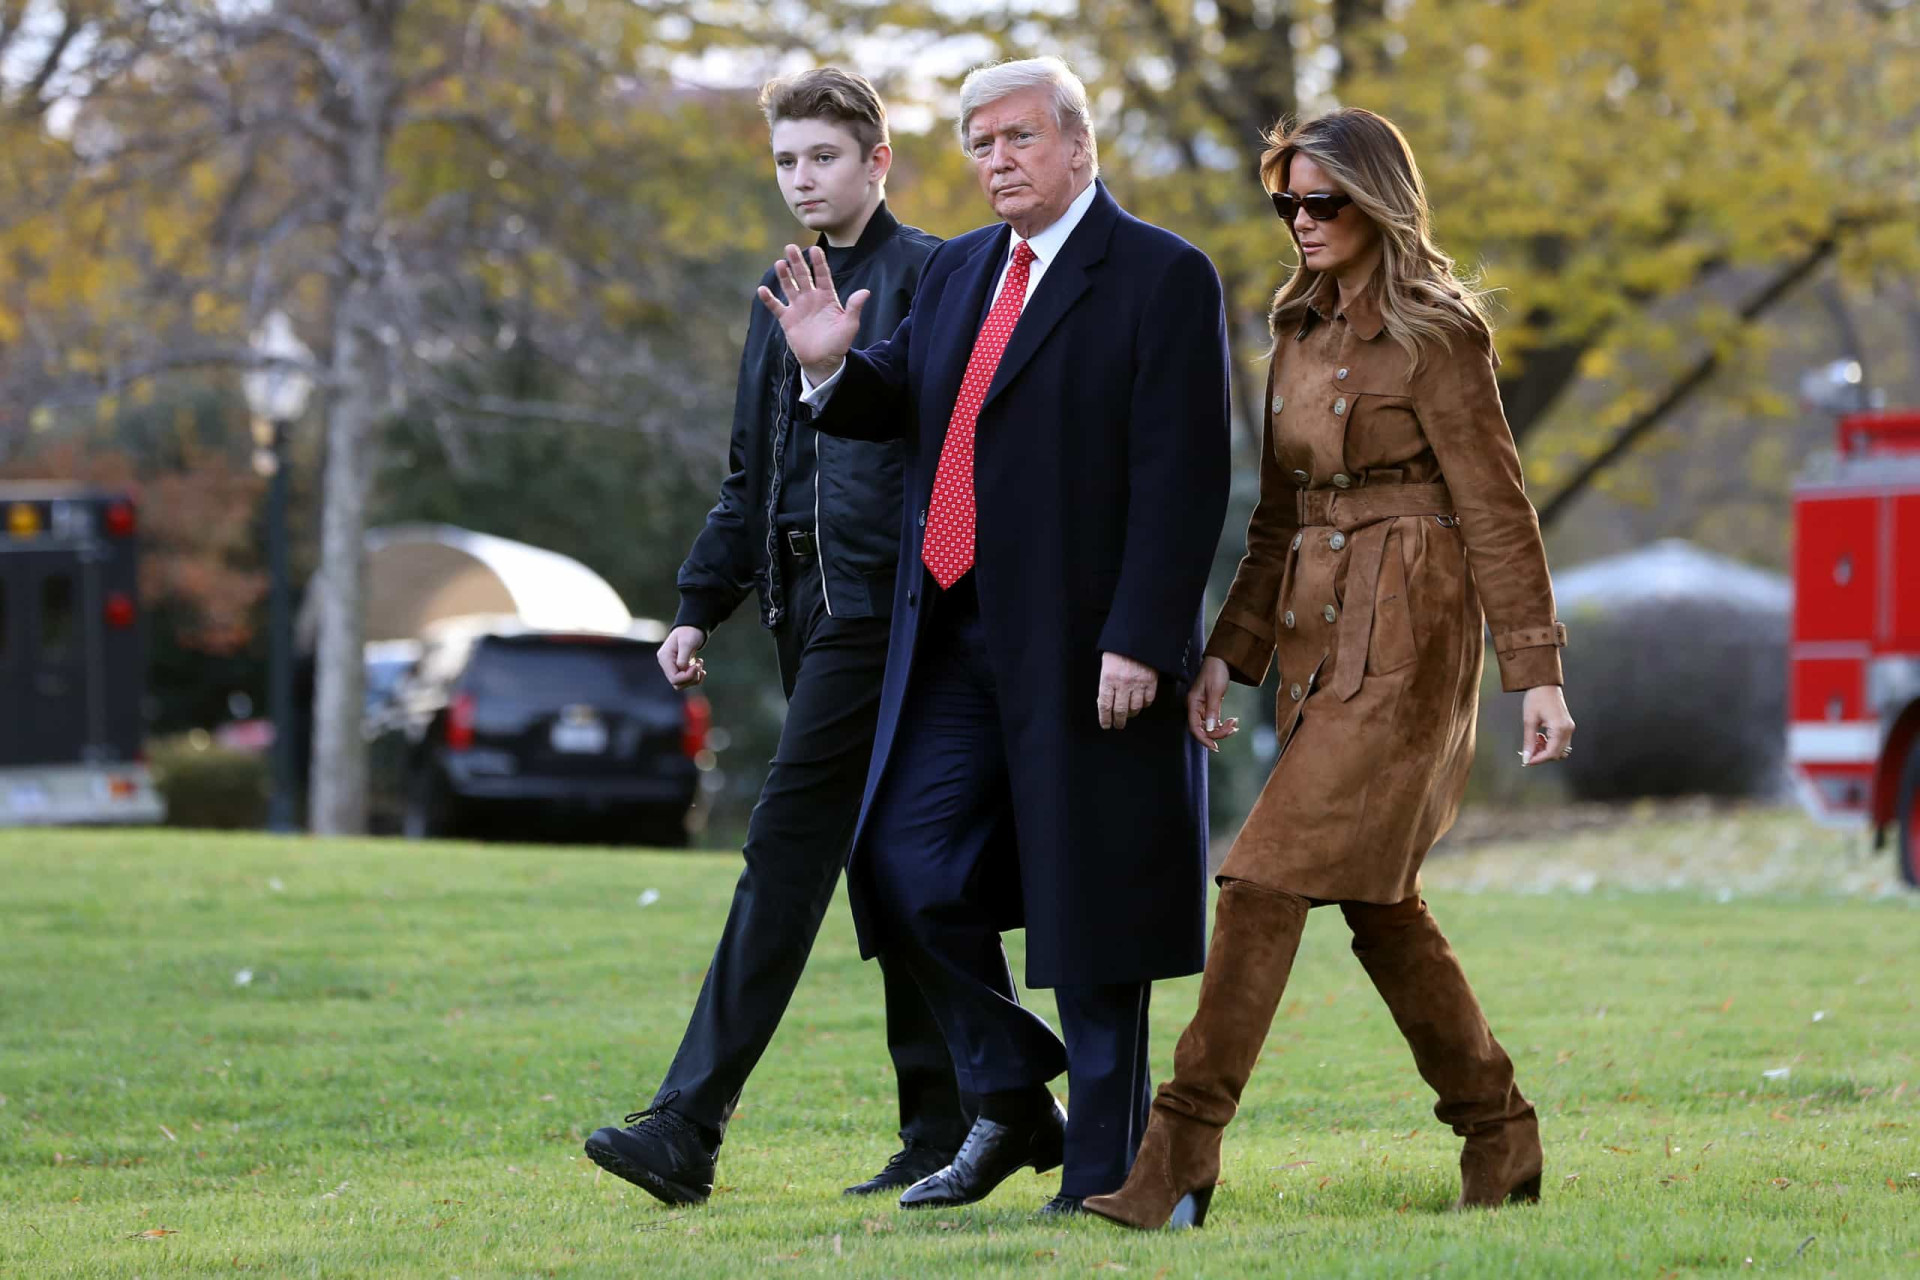 <p>Melania Trump stayed in New York with son Barron until he finished the school year, before joining Donald Trump in the White House.</p><p><a href="https://www.msn.com/en-us/community/channel/vid-7xx8mnucu55yw63we9va2gwr7uihbxwc68fxqp25x6tg4ftibpra?cvid=94631541bc0f4f89bfd59158d696ad7e">Follow us and access great exclusive content every day</a></p>